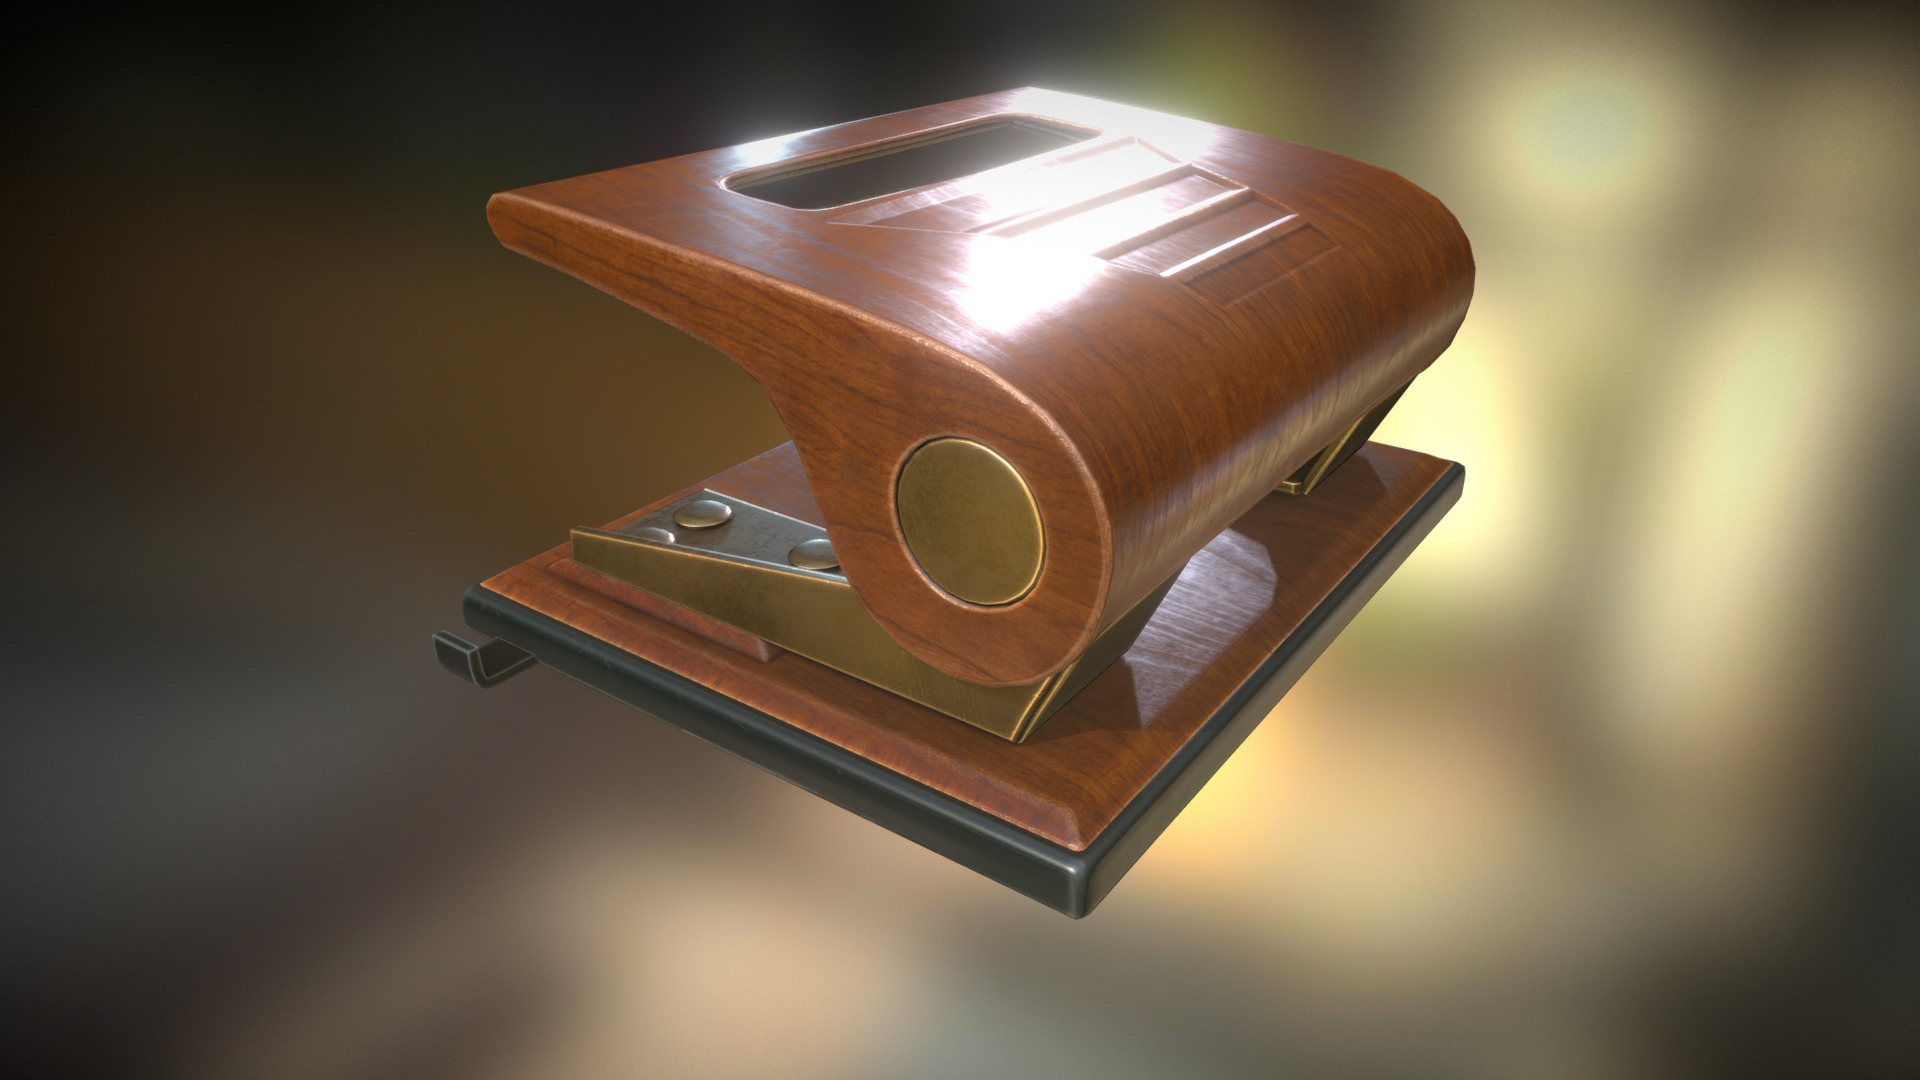 3D model Hole Punch Wood Version 1 Rigged and Animated - This is a 3D model of the Hole Punch Wood Version 1 Rigged and Animated. The 3D model is about a wooden box with a lid.